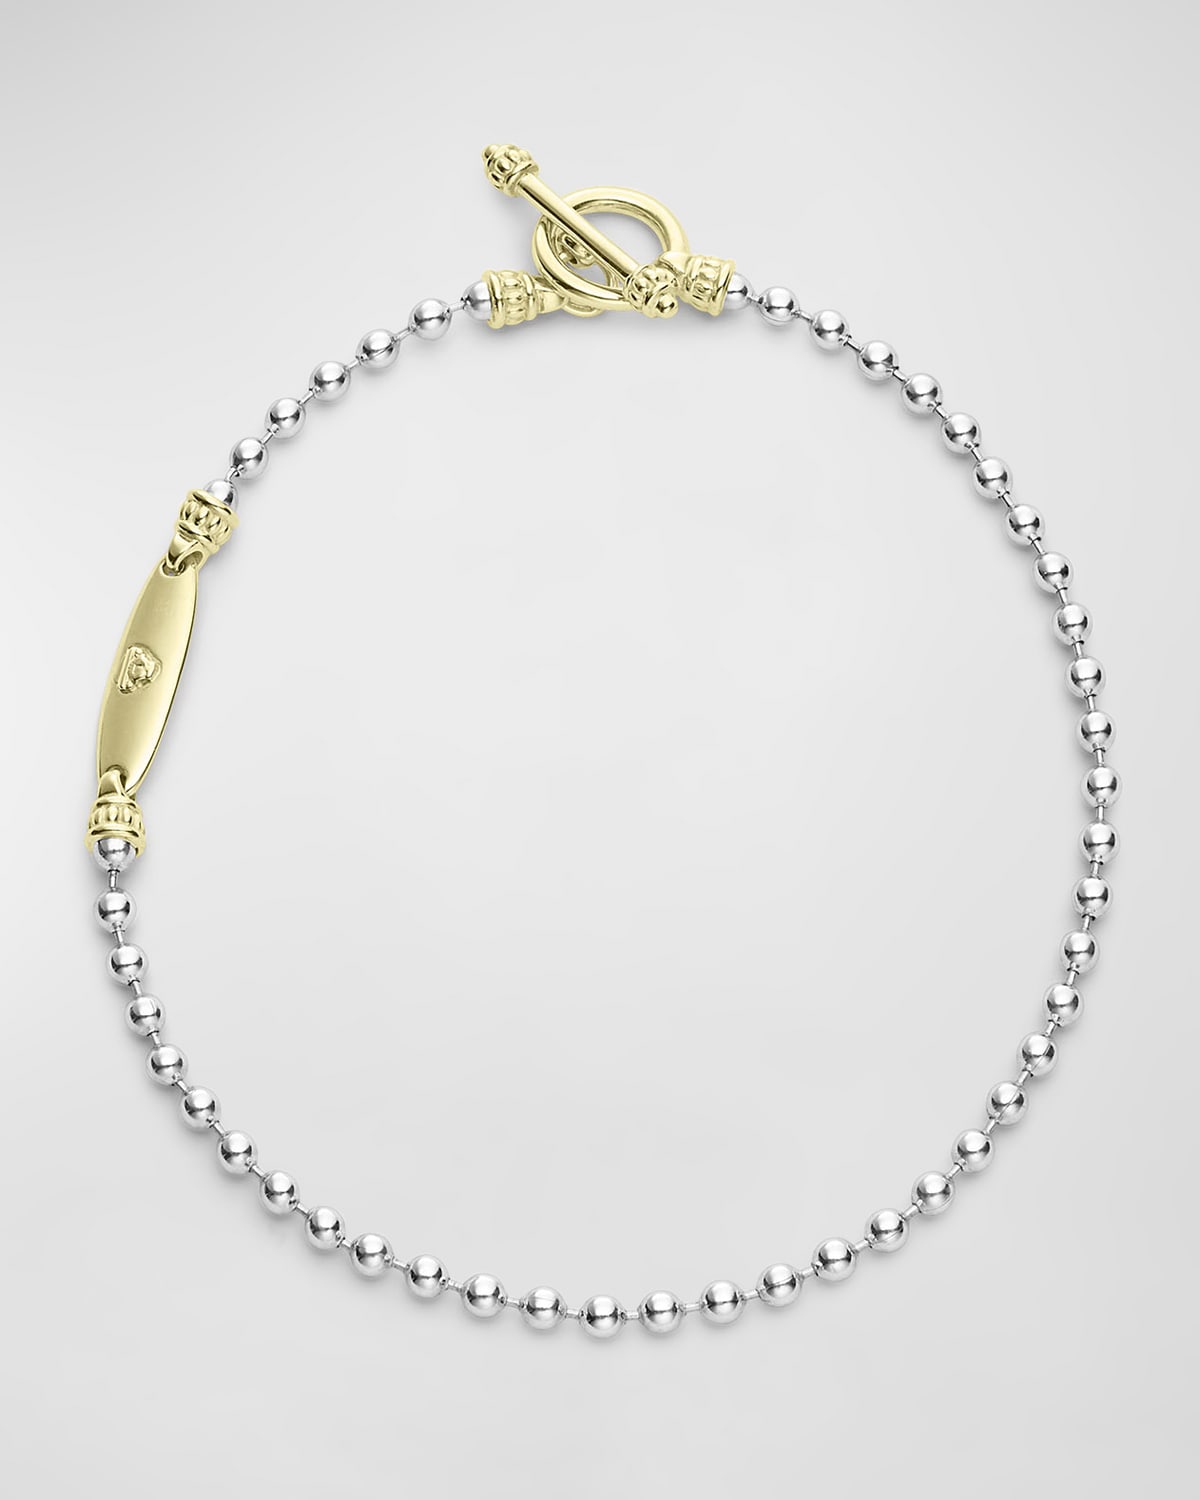 LAGOS Two-Tone Beaded Toggle Bracelet in 18K Gold and Sterling Silver